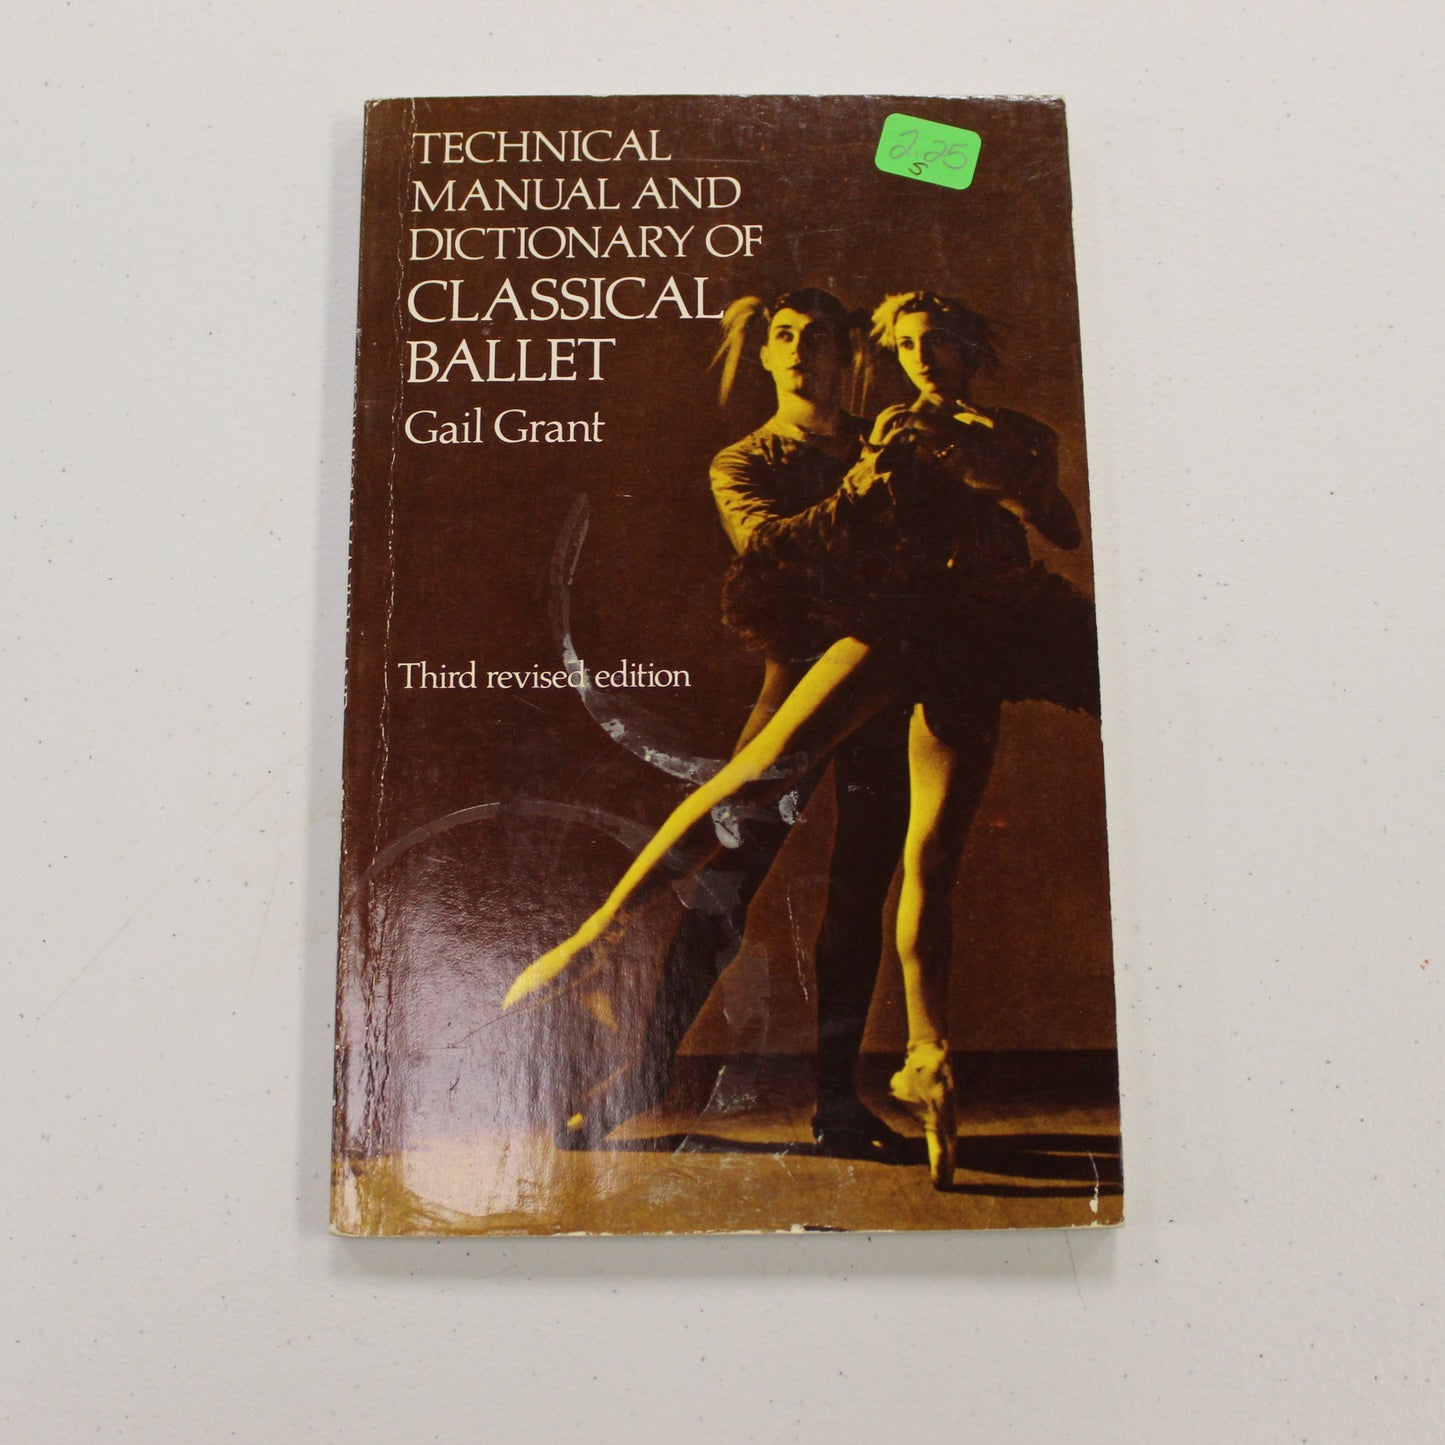 TECHNICAL MANUAL AND DICTIONARY OF CLASSICAL BALLET